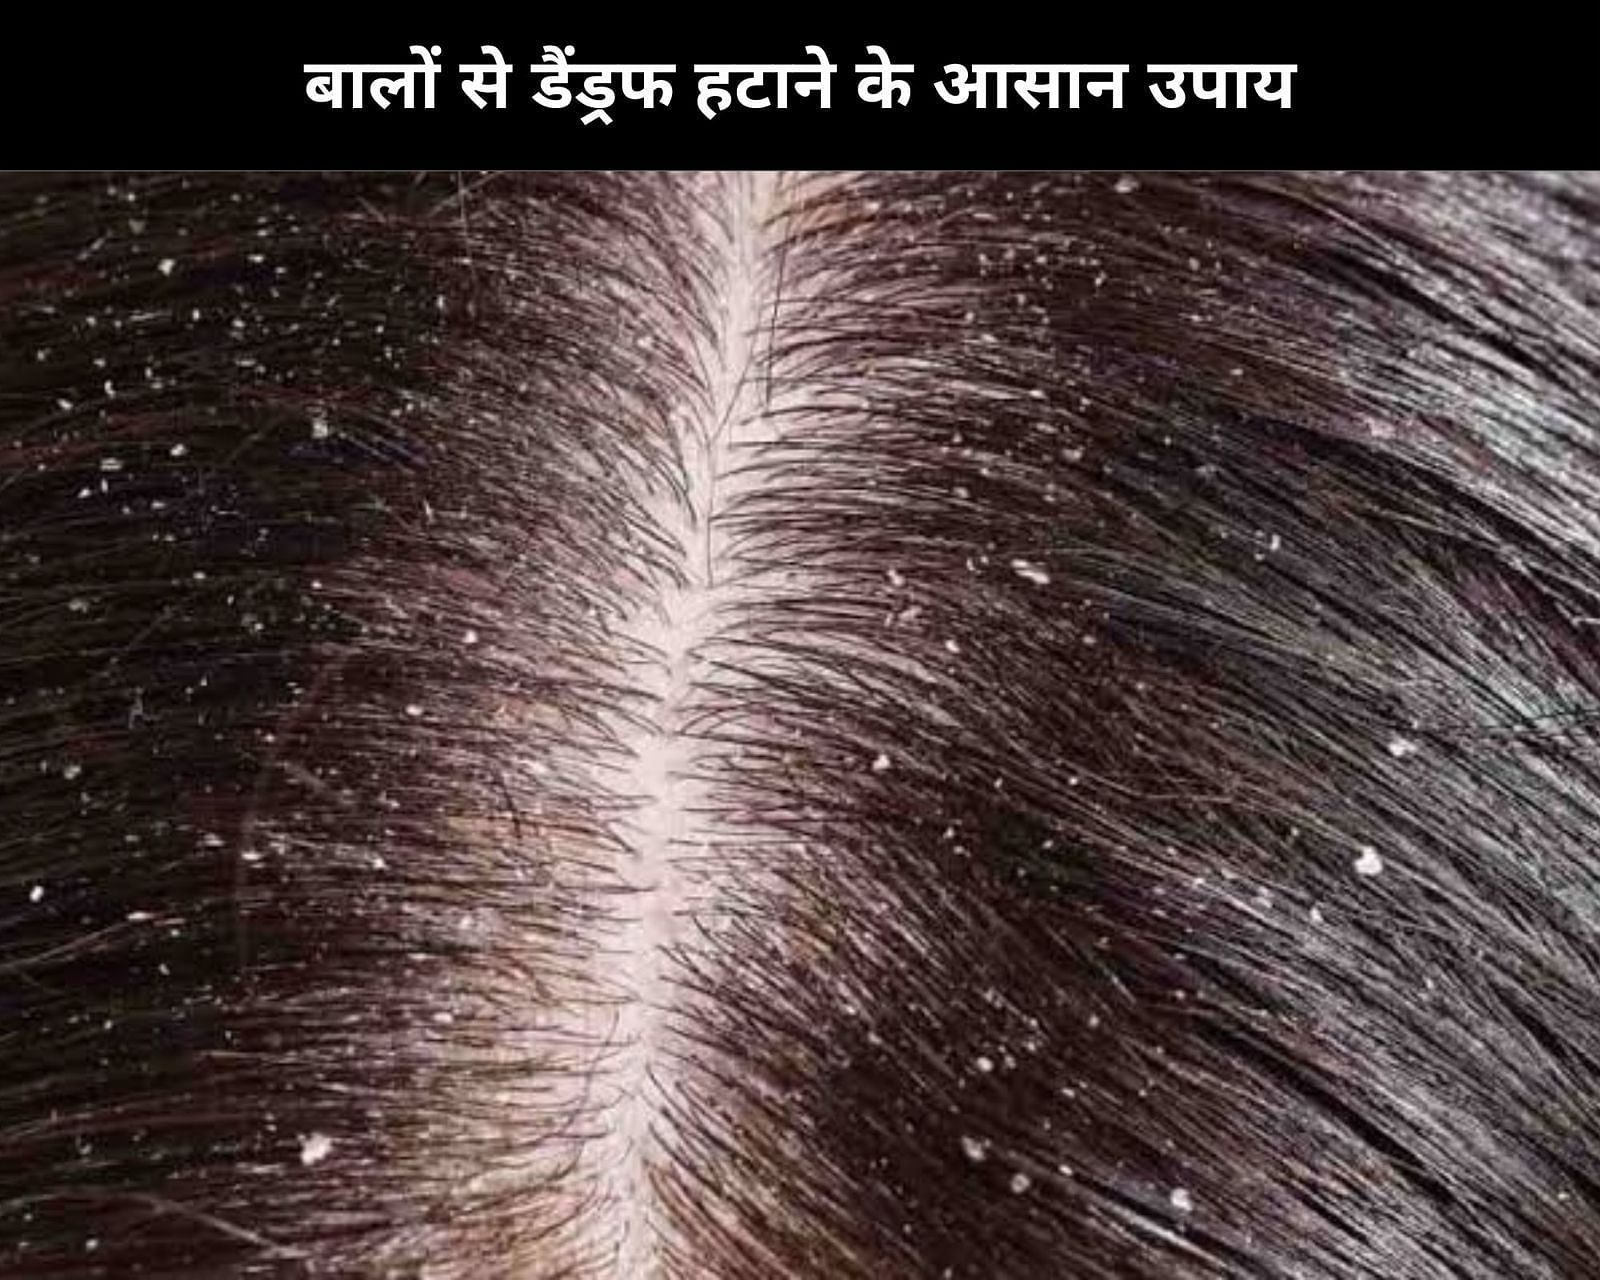 How to get rid of dandruff  Get Healthy Scalp and Hair Growth